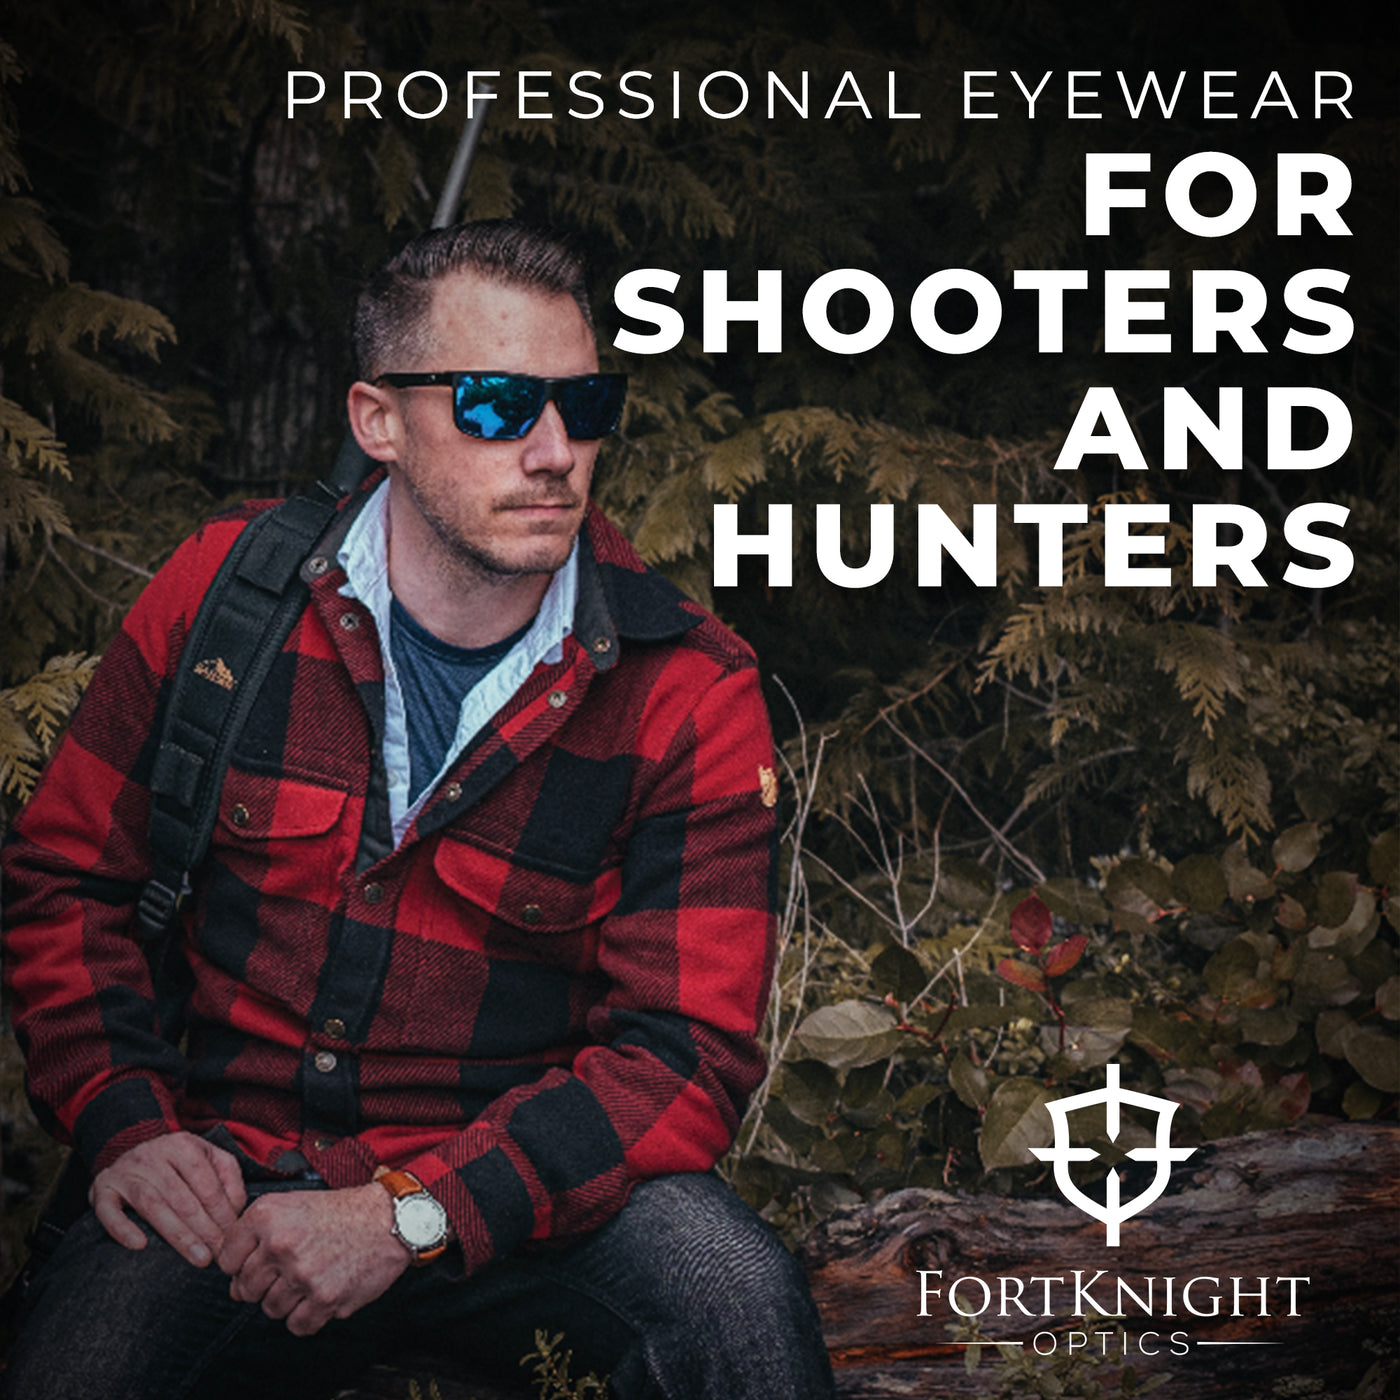 FortKnight Optics Premium Shooting Glasses - Tactical Eyewear featuring lenses by ZEISS - The Best Shooting Glasses for On and Off the Range